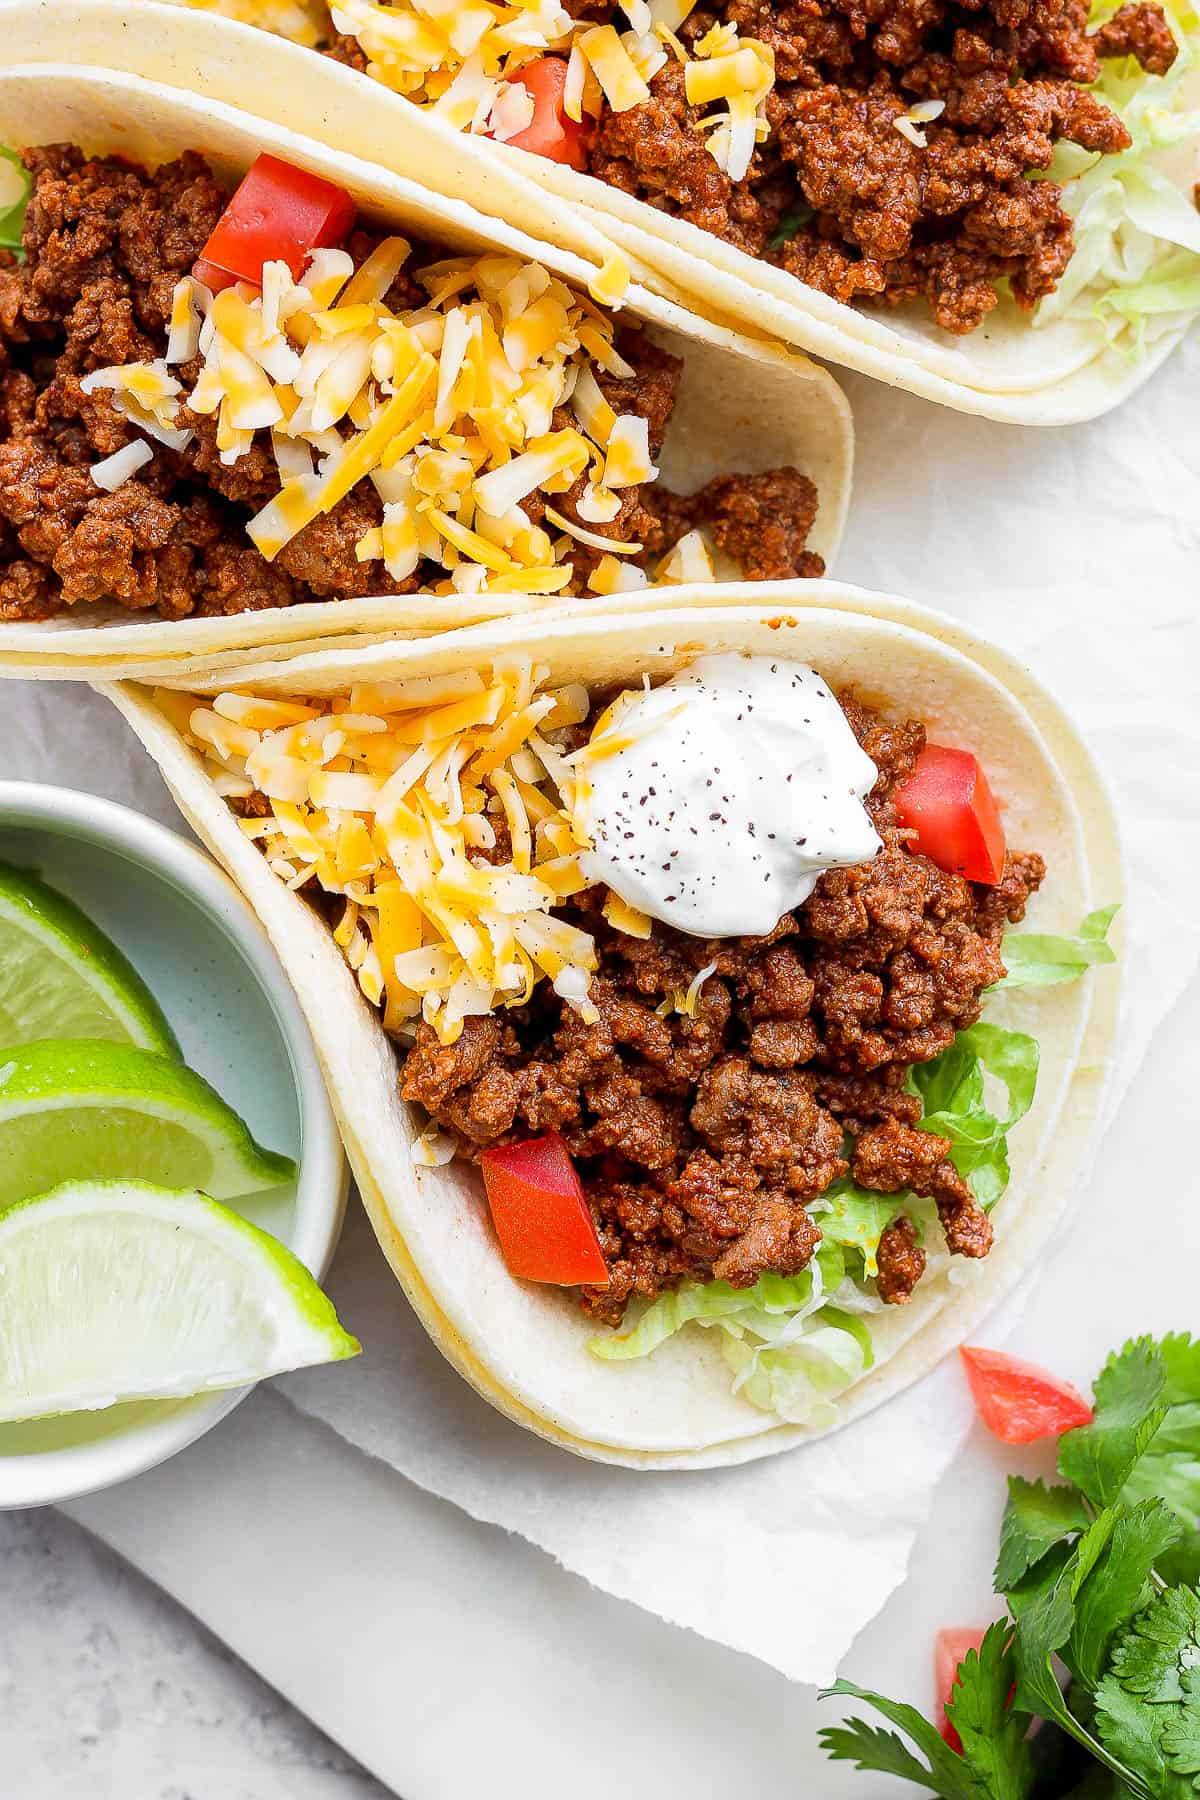 Ground beef tacos with shredded lettuce, cheese, tomatoes, and sour cream.